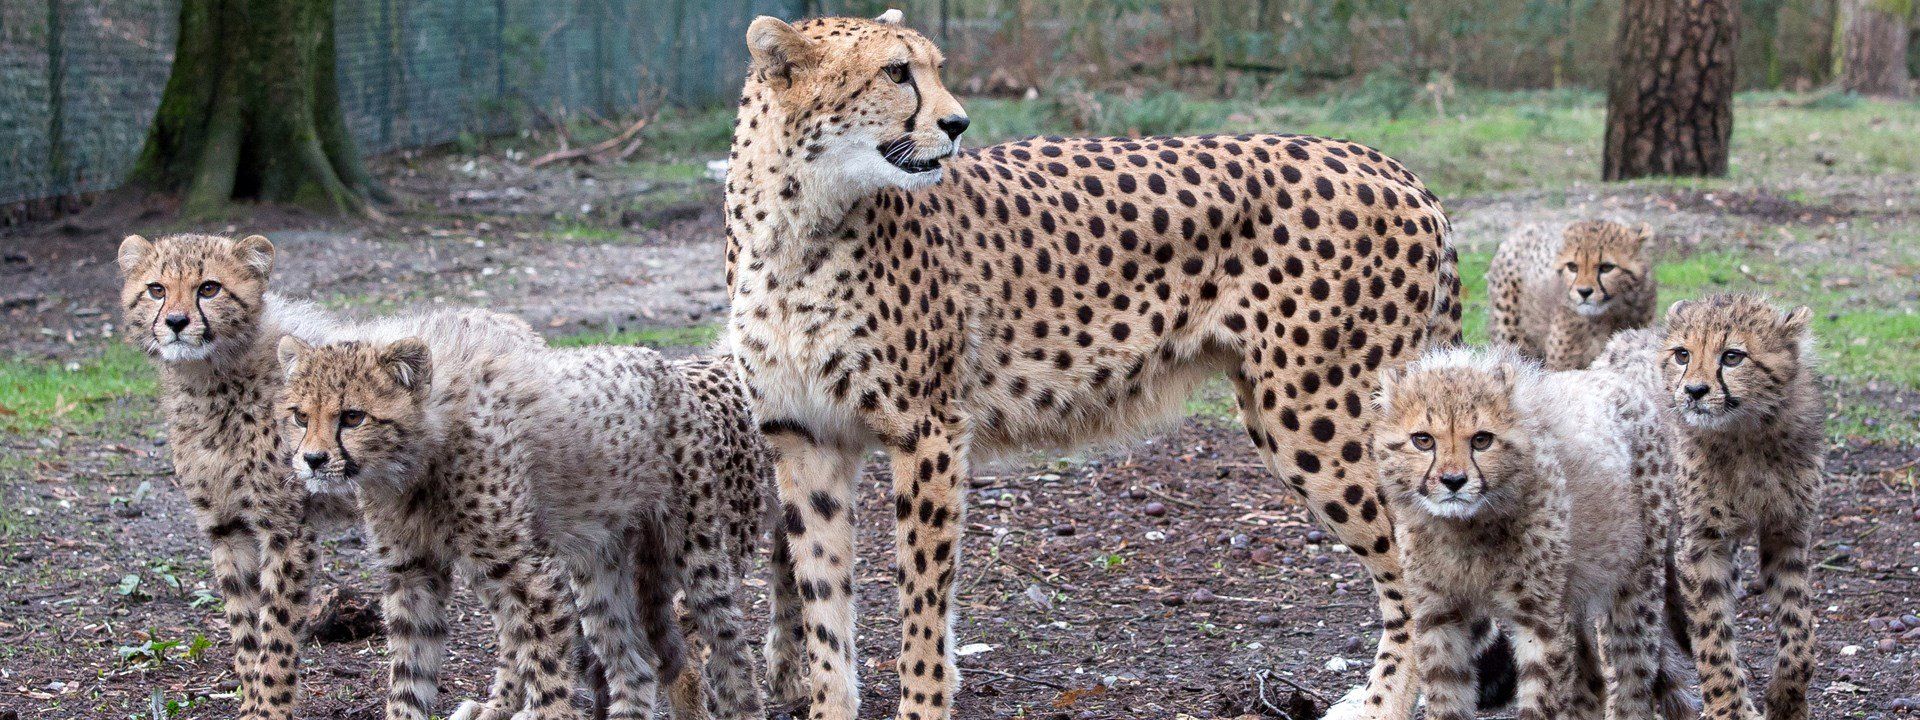 Top 10 zoos in The Netherlands